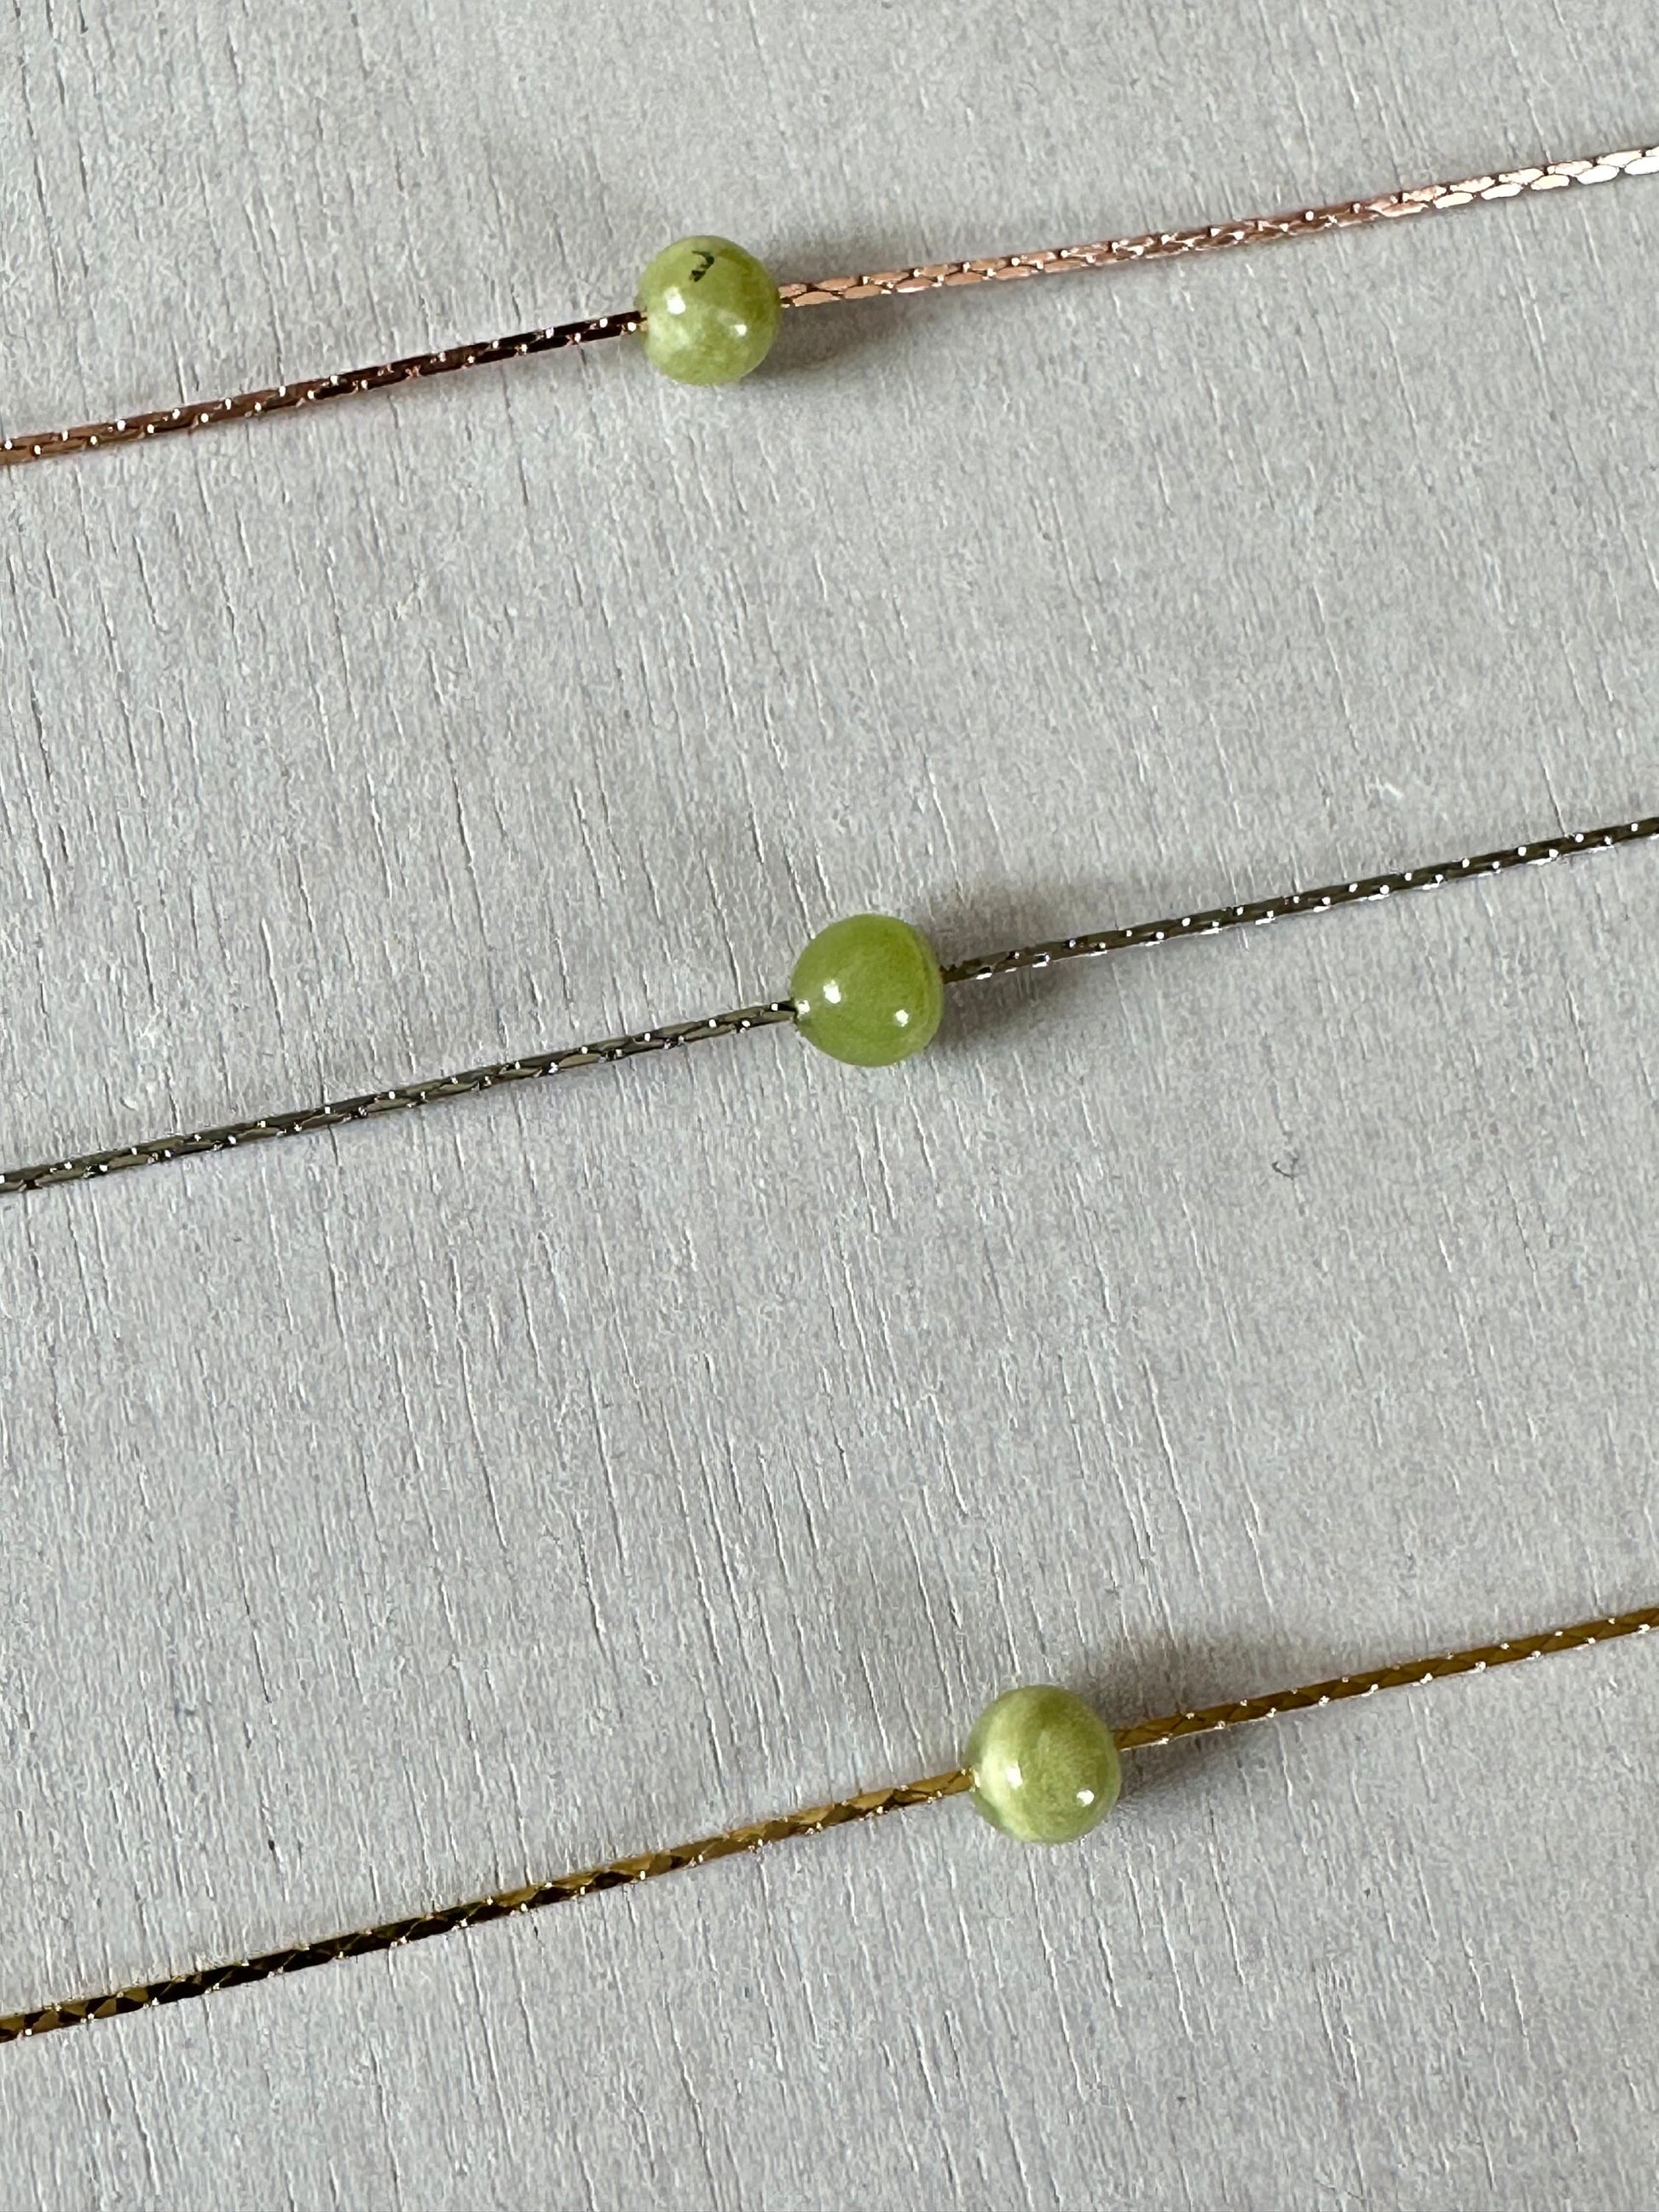 Peridot Opal Necklace | Rose Gold | Gold | Silver | Dainty Necklace | Layering Necklace | Gemstone Necklace | Bead Necklace